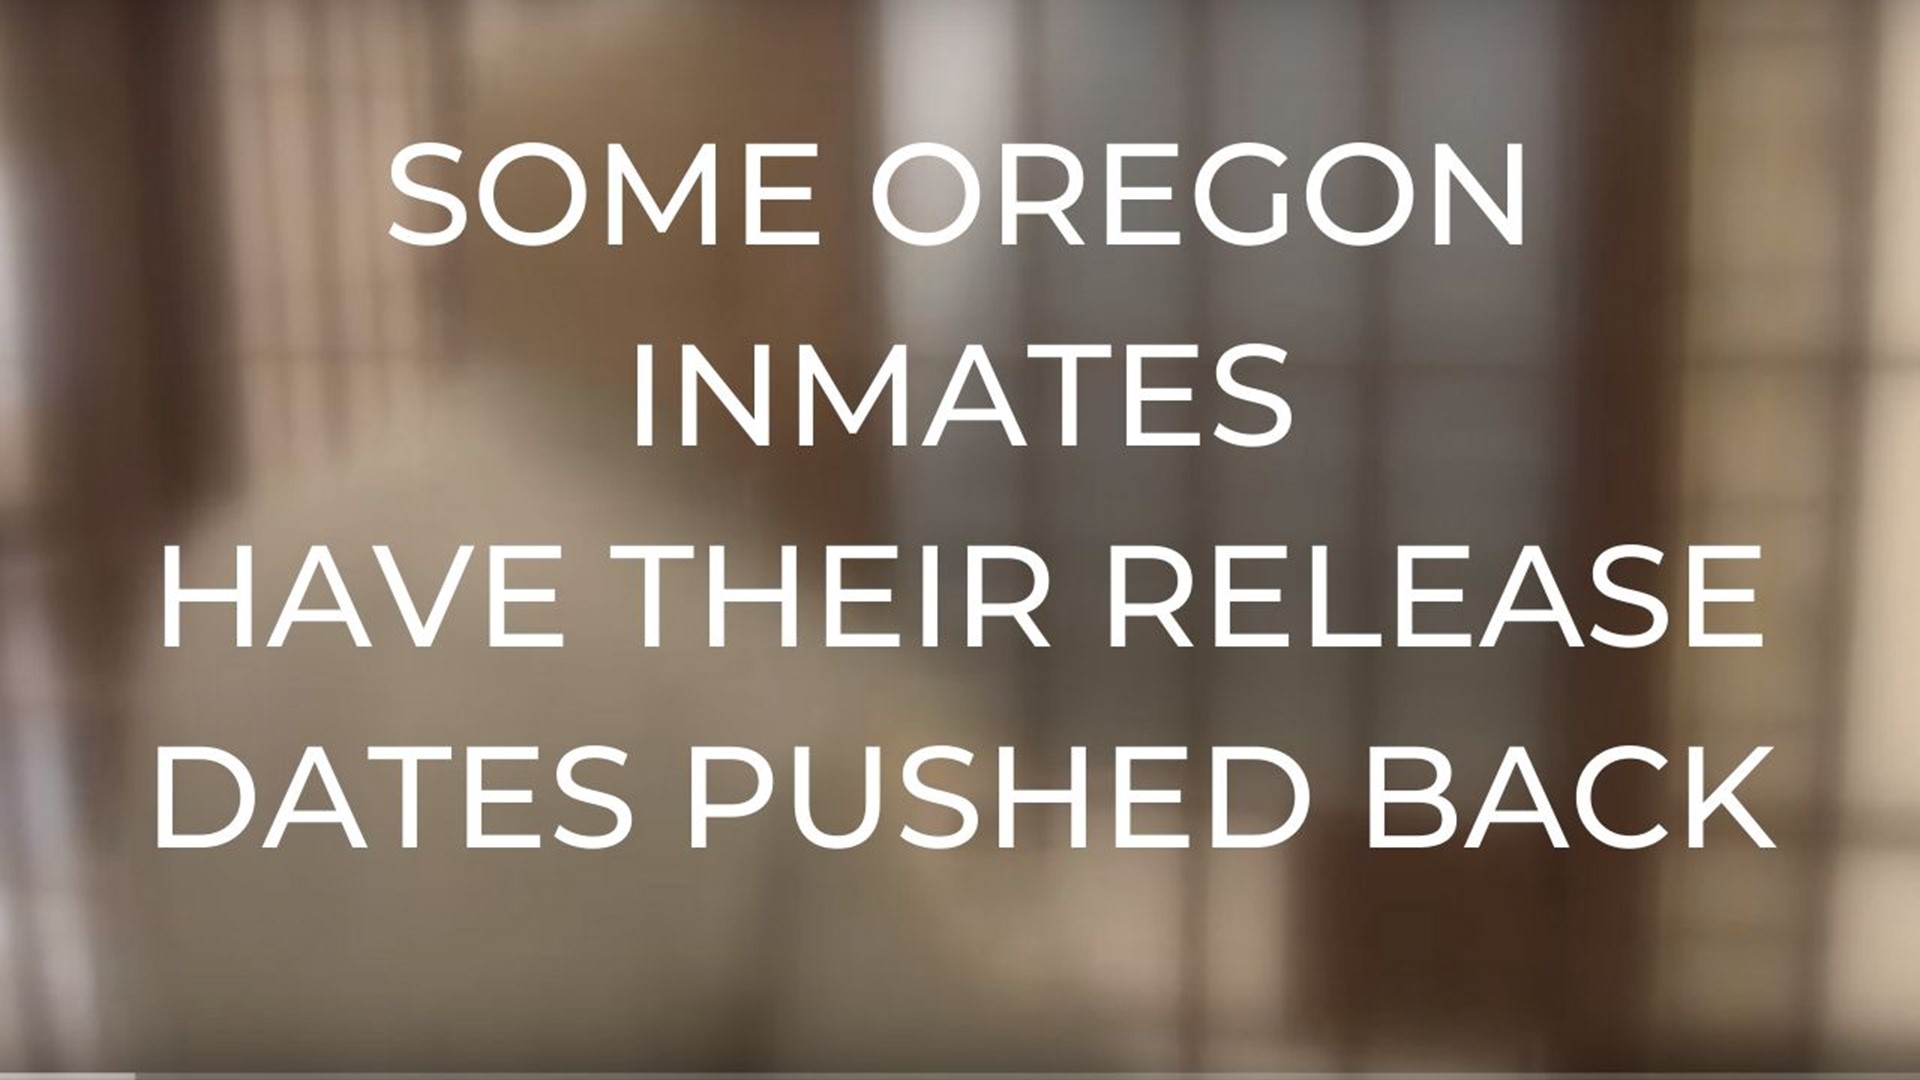 Because if the COVID-19 outbreak, 217 inmates had their released dates pushed back. At the same time, Governor Brown is looking at releasing some inmates early to le